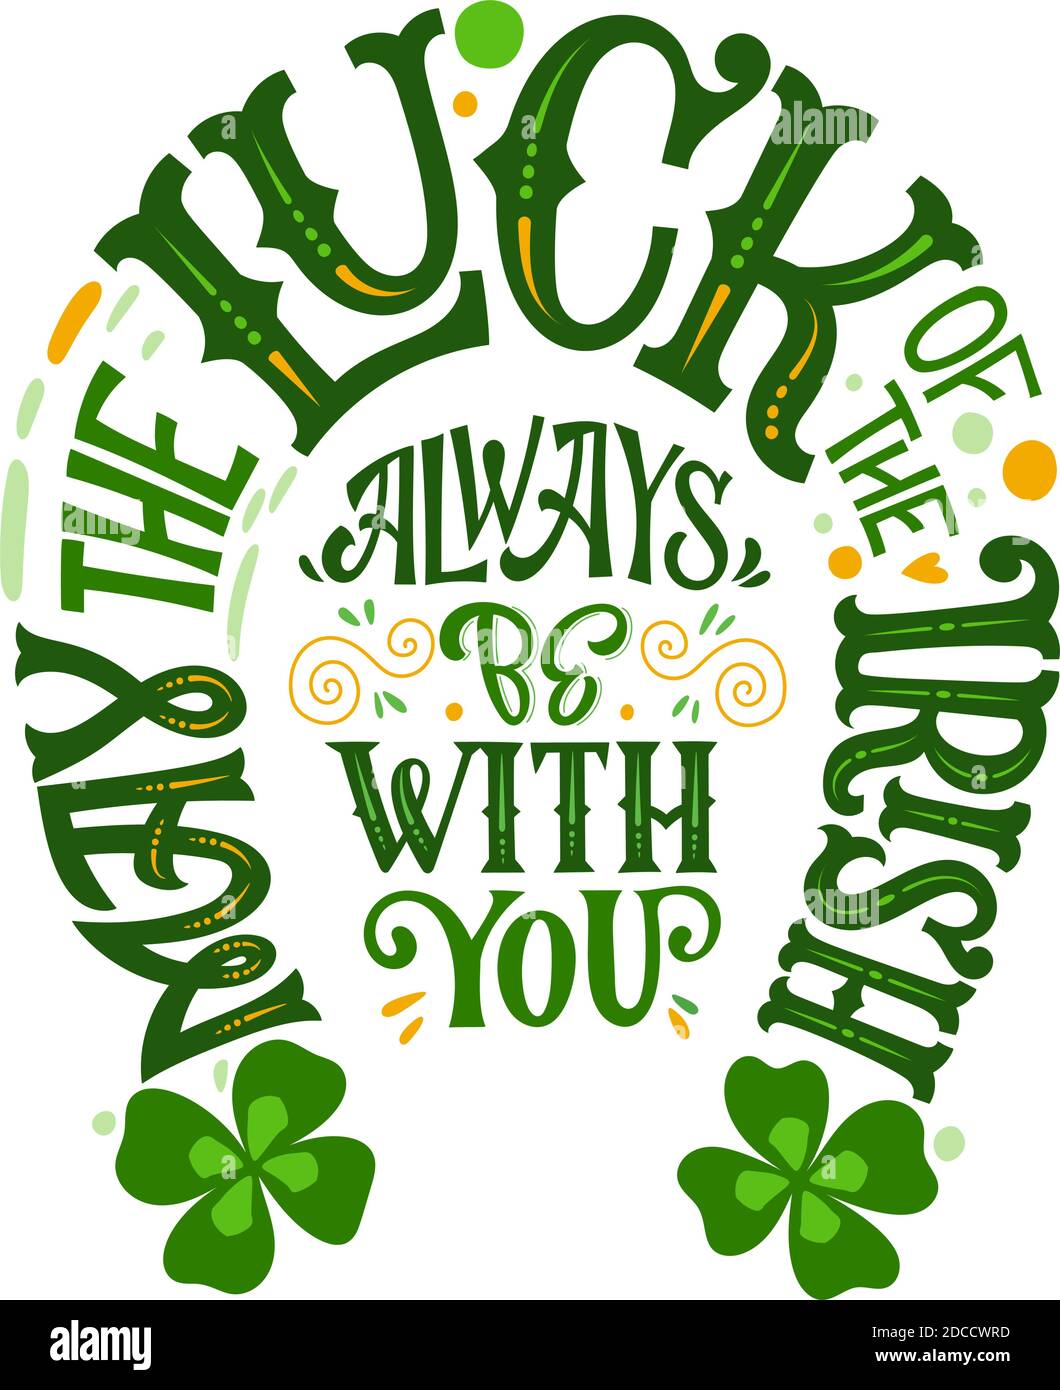 May the luck of the Irish always be with you - hand drawn vector